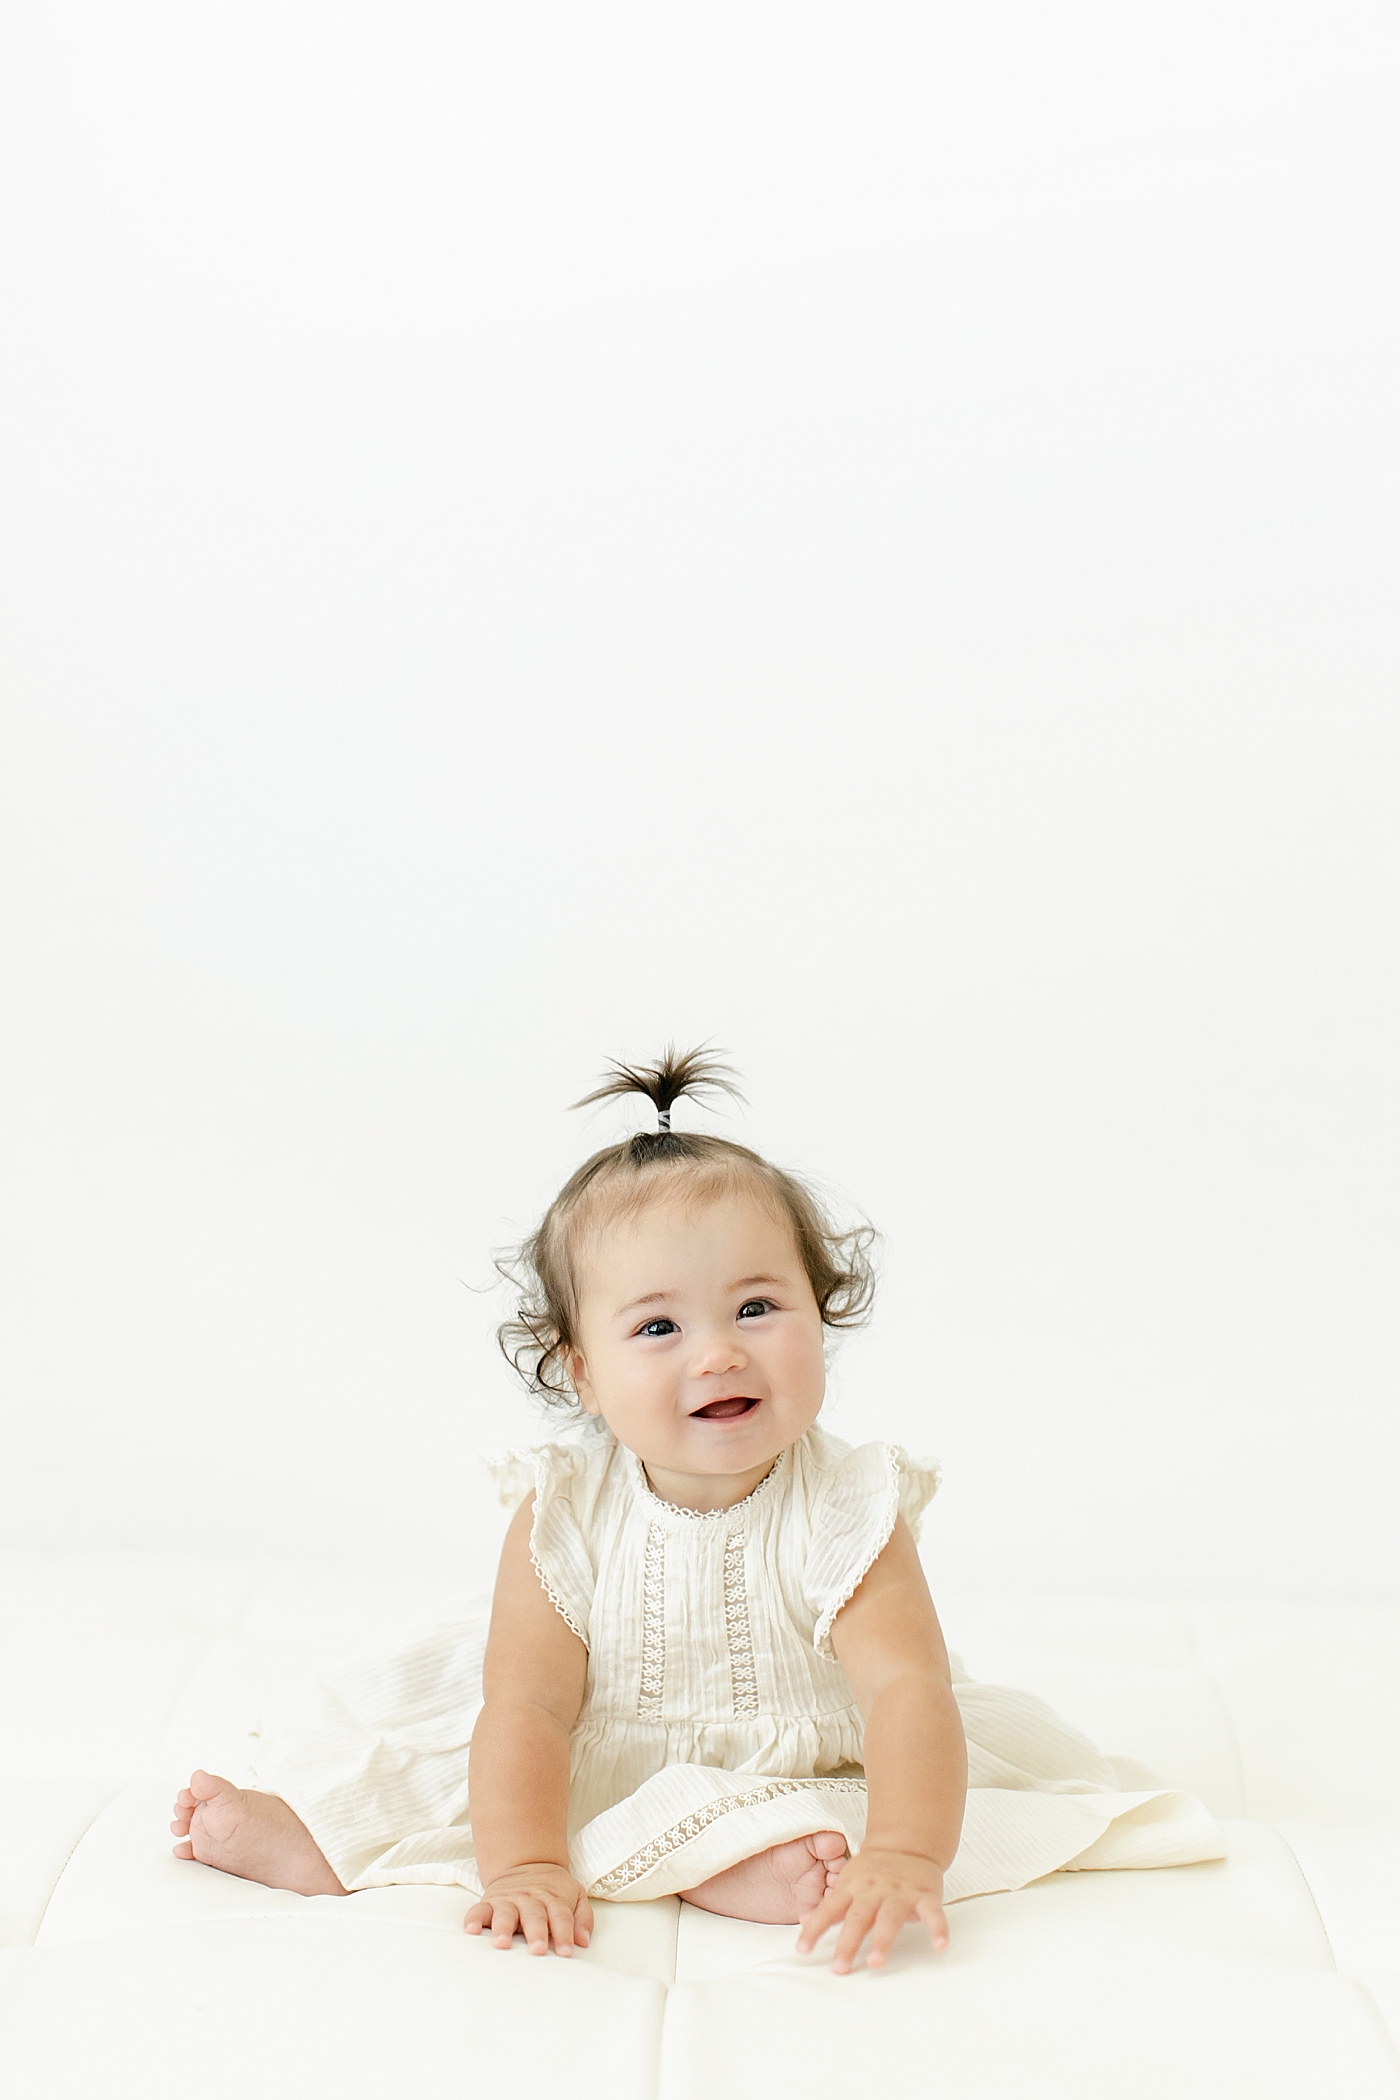 Baby girl with a ponytail in a cream dress | Image by Chrissy Winchester Photography